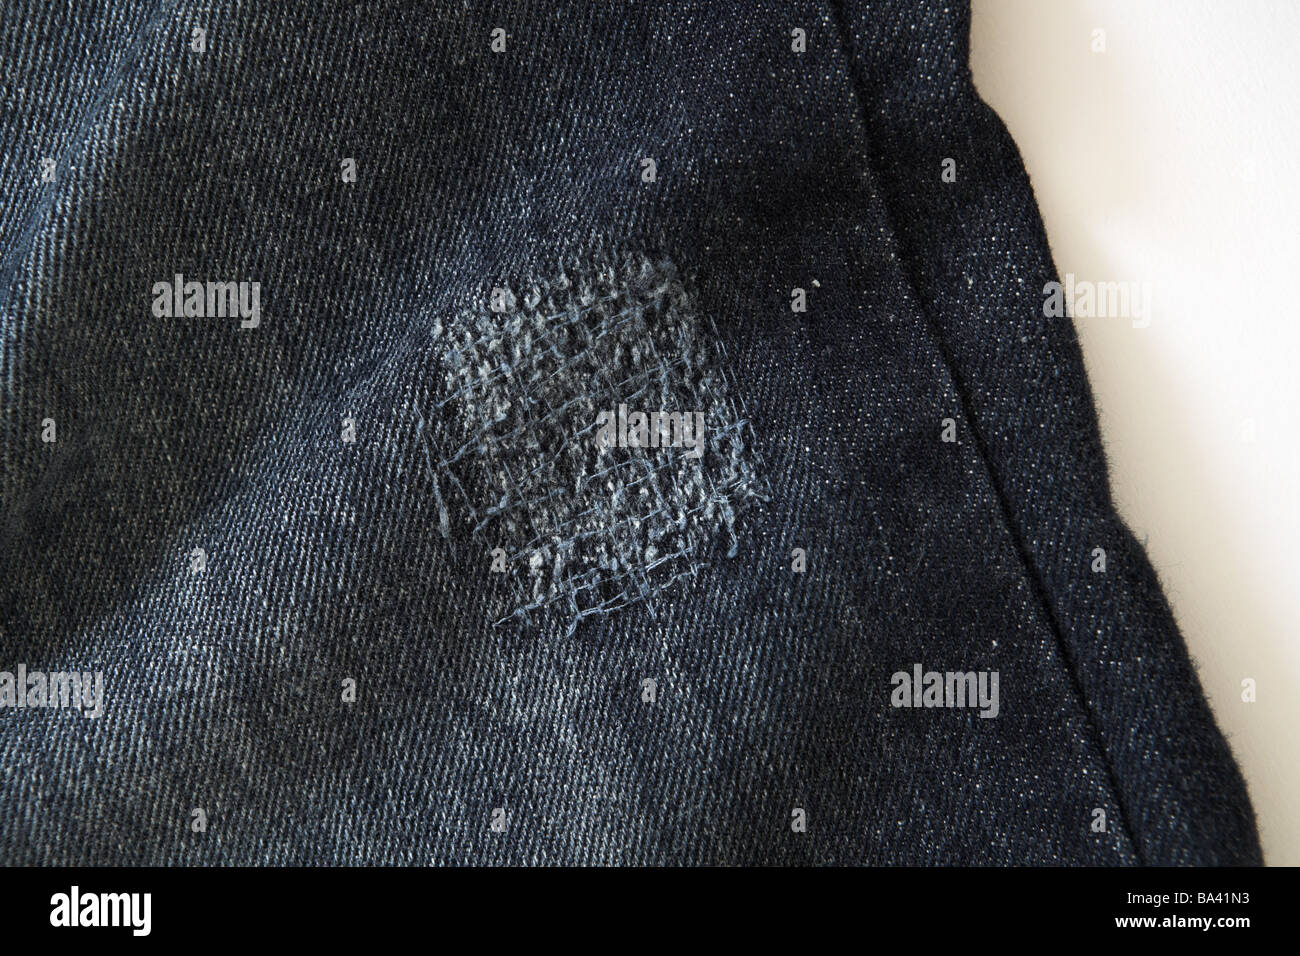 Pants jeans detail mended clothing handicraft Näharbeiten jeans pant leg  hole stuffed patchwork mending repairs fact-reception Stock Photo - Alamy